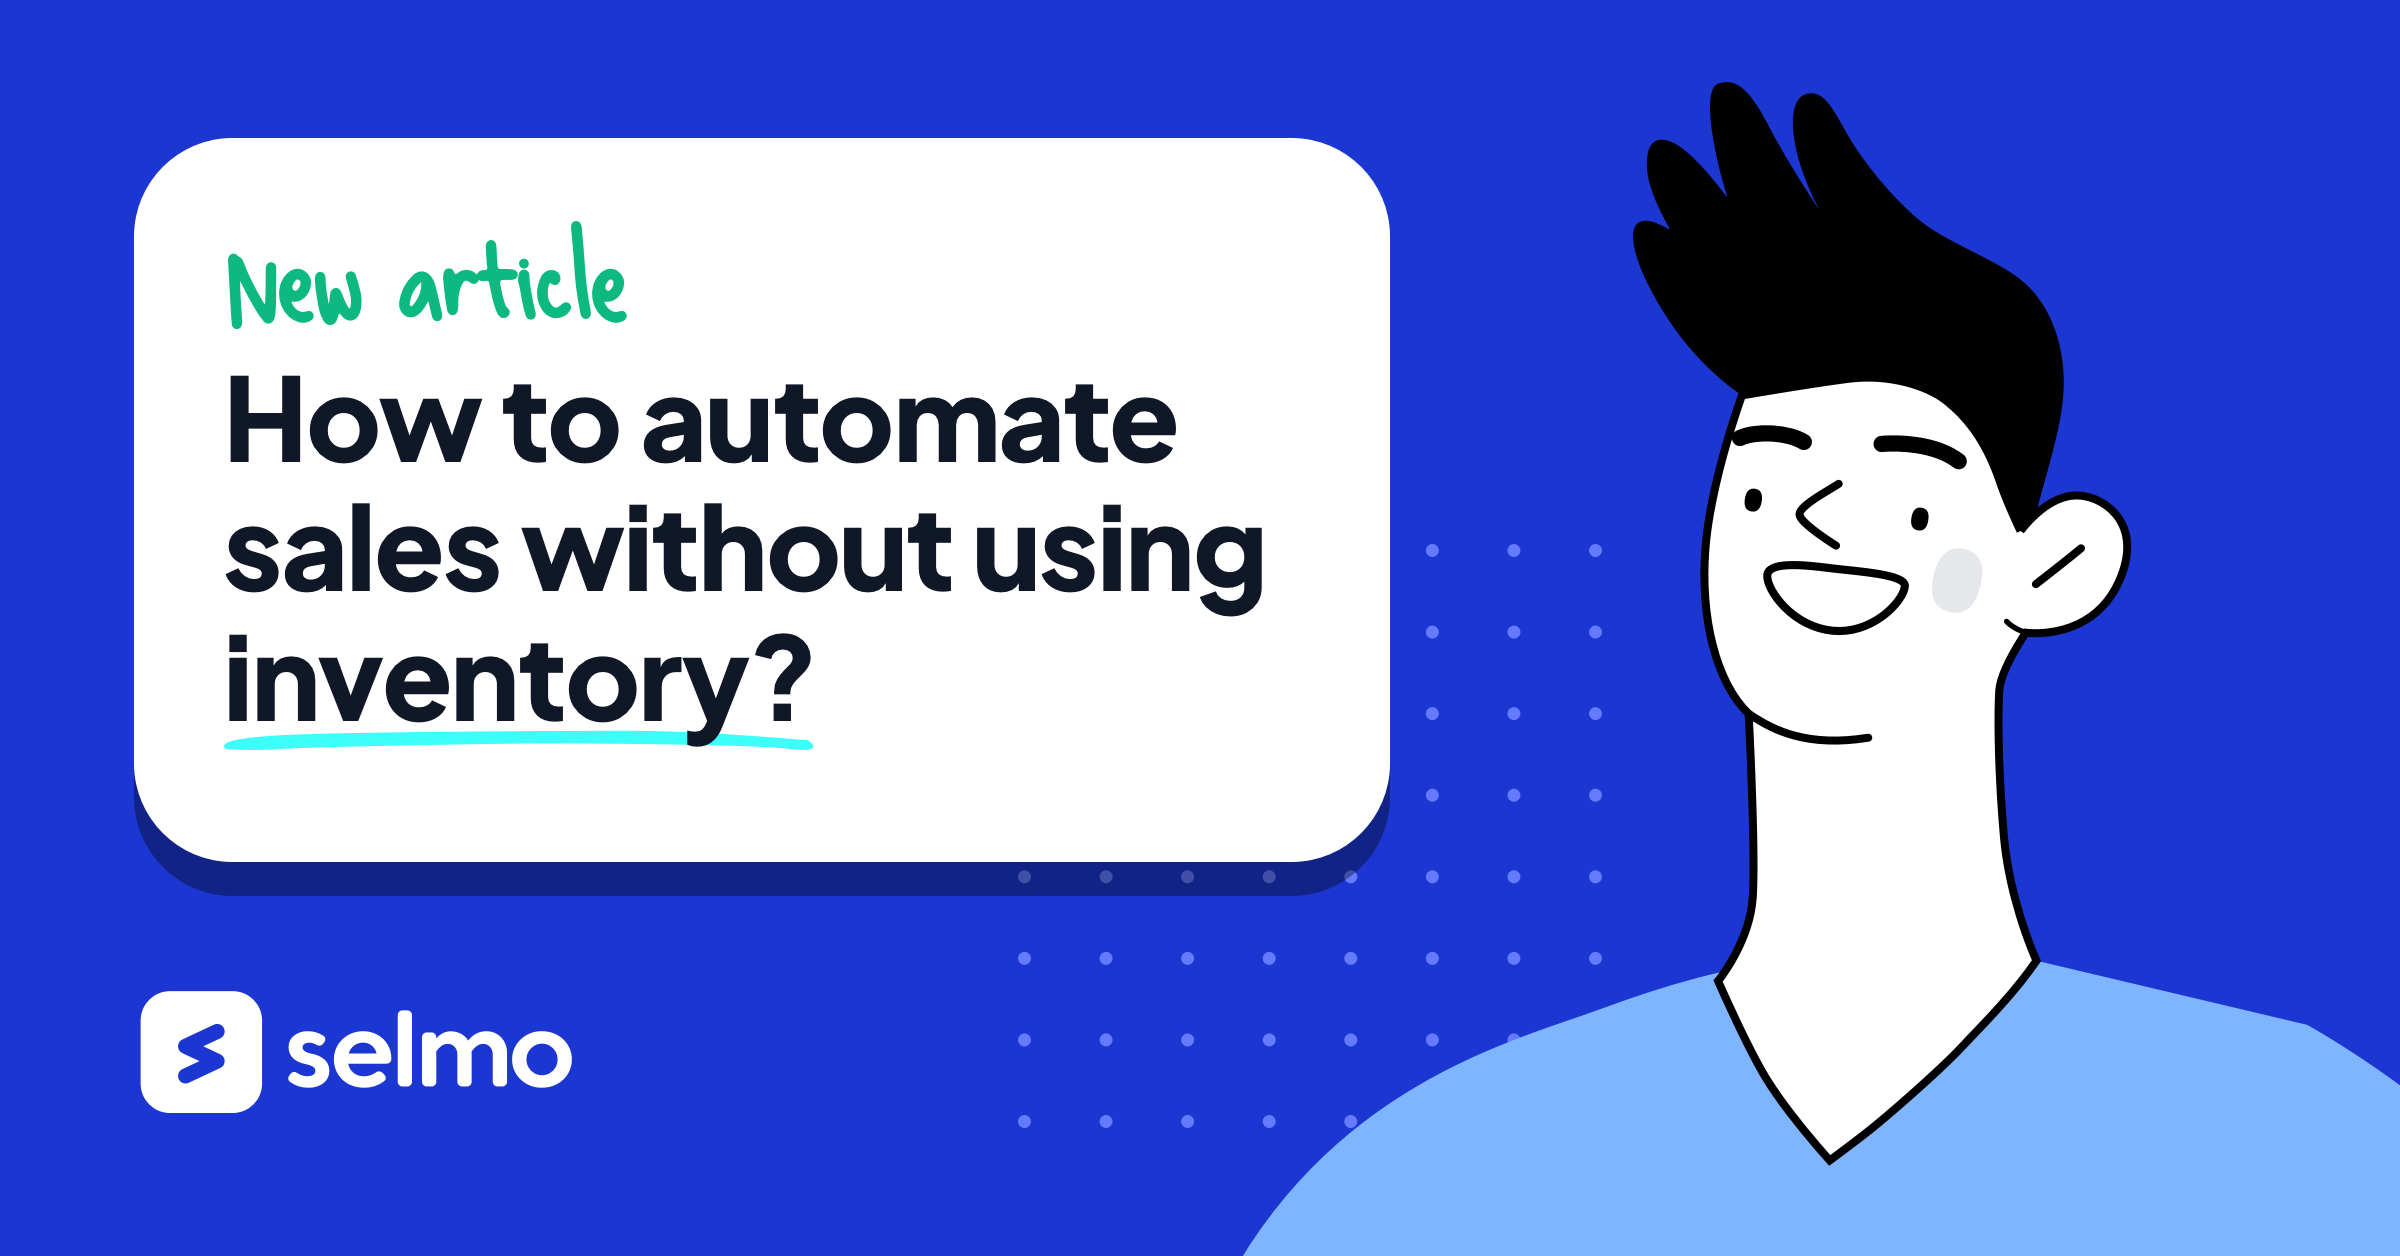 How to automate sales without using inventory?